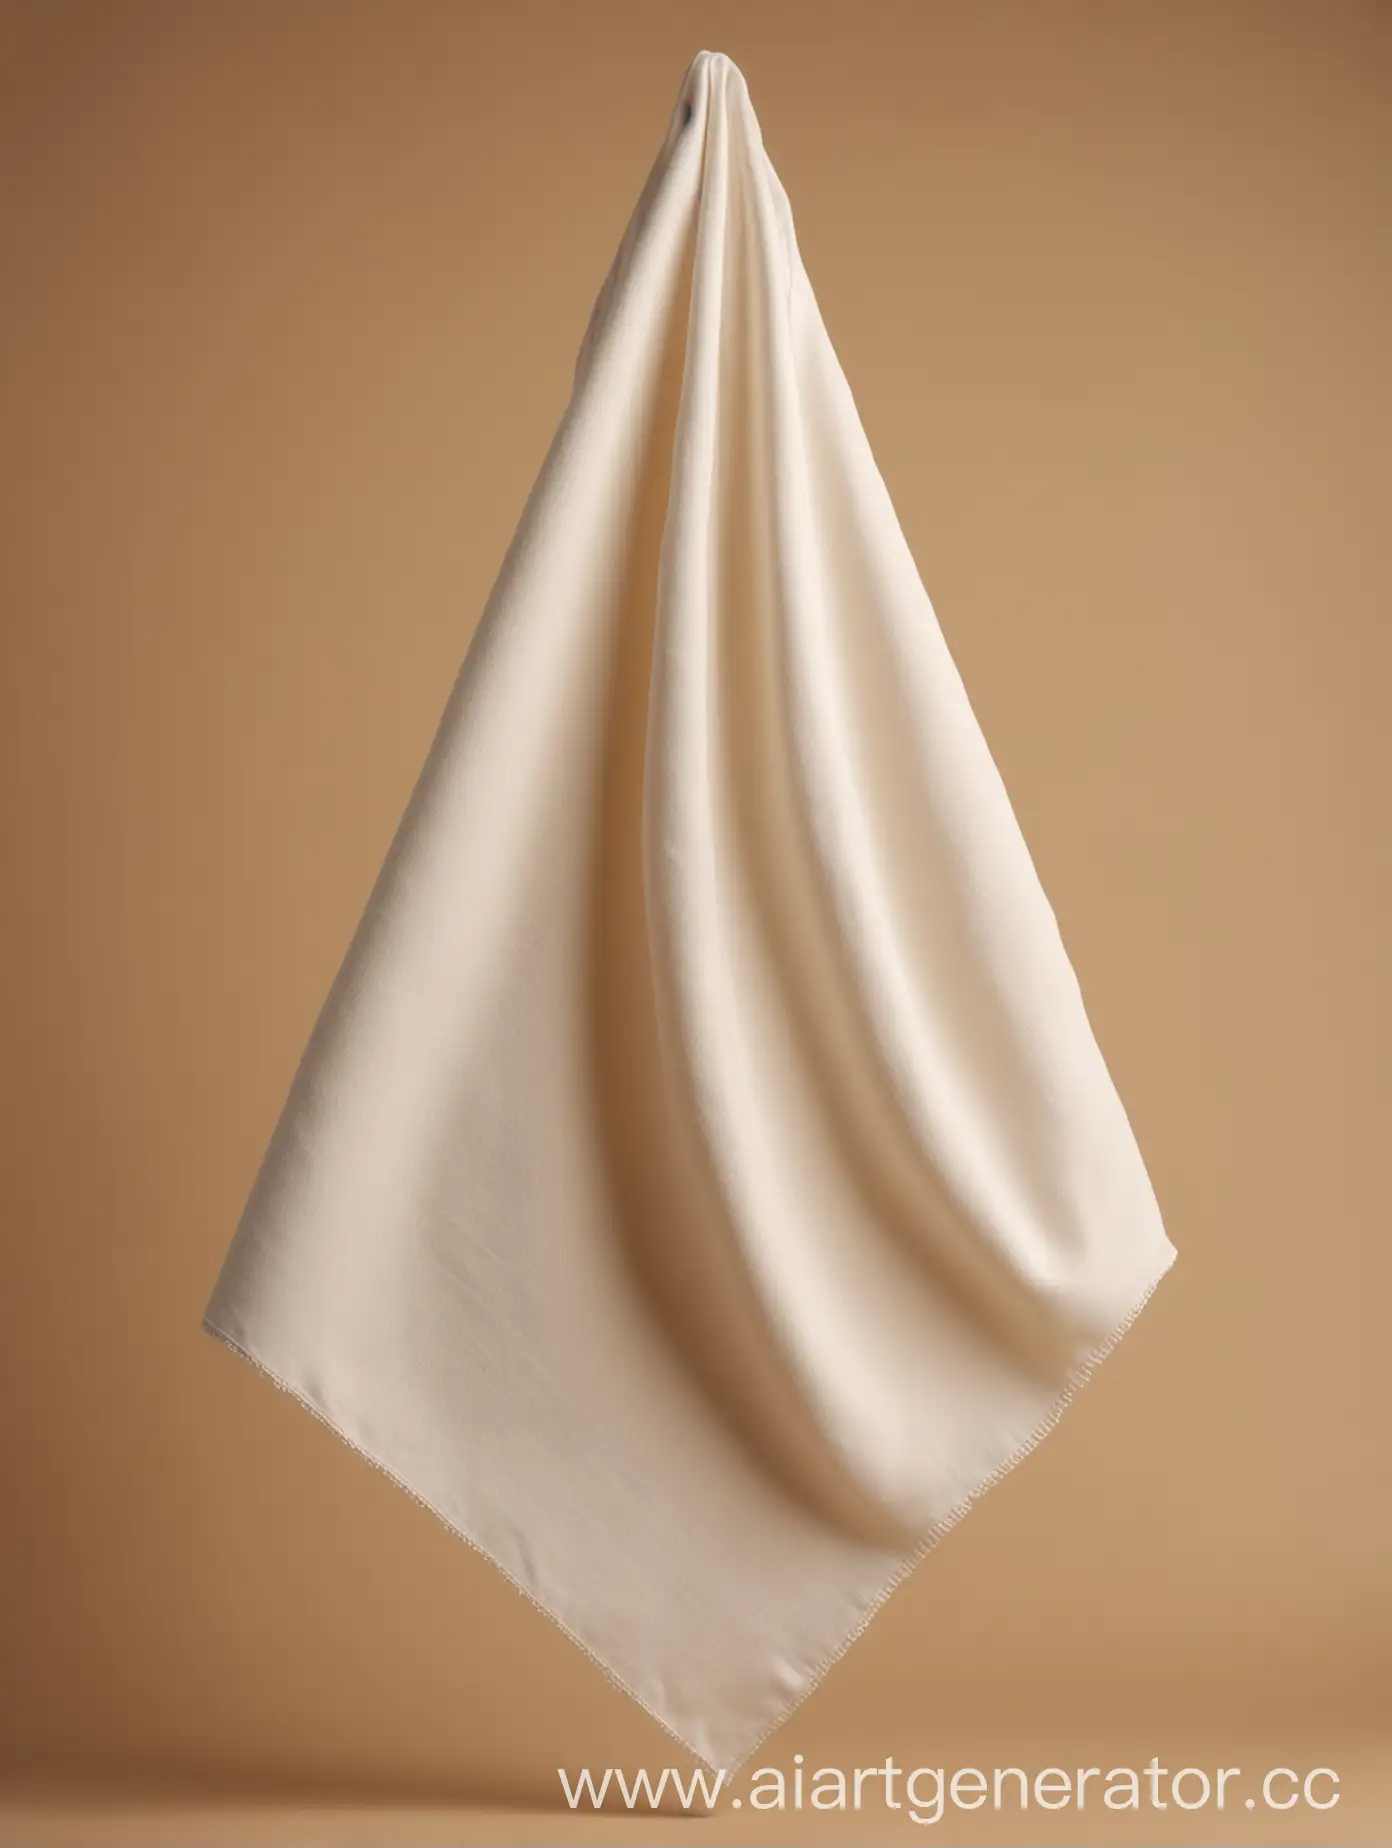 Floating-MediumSized-White-Handkerchief-with-Shadow-on-Beige-Background